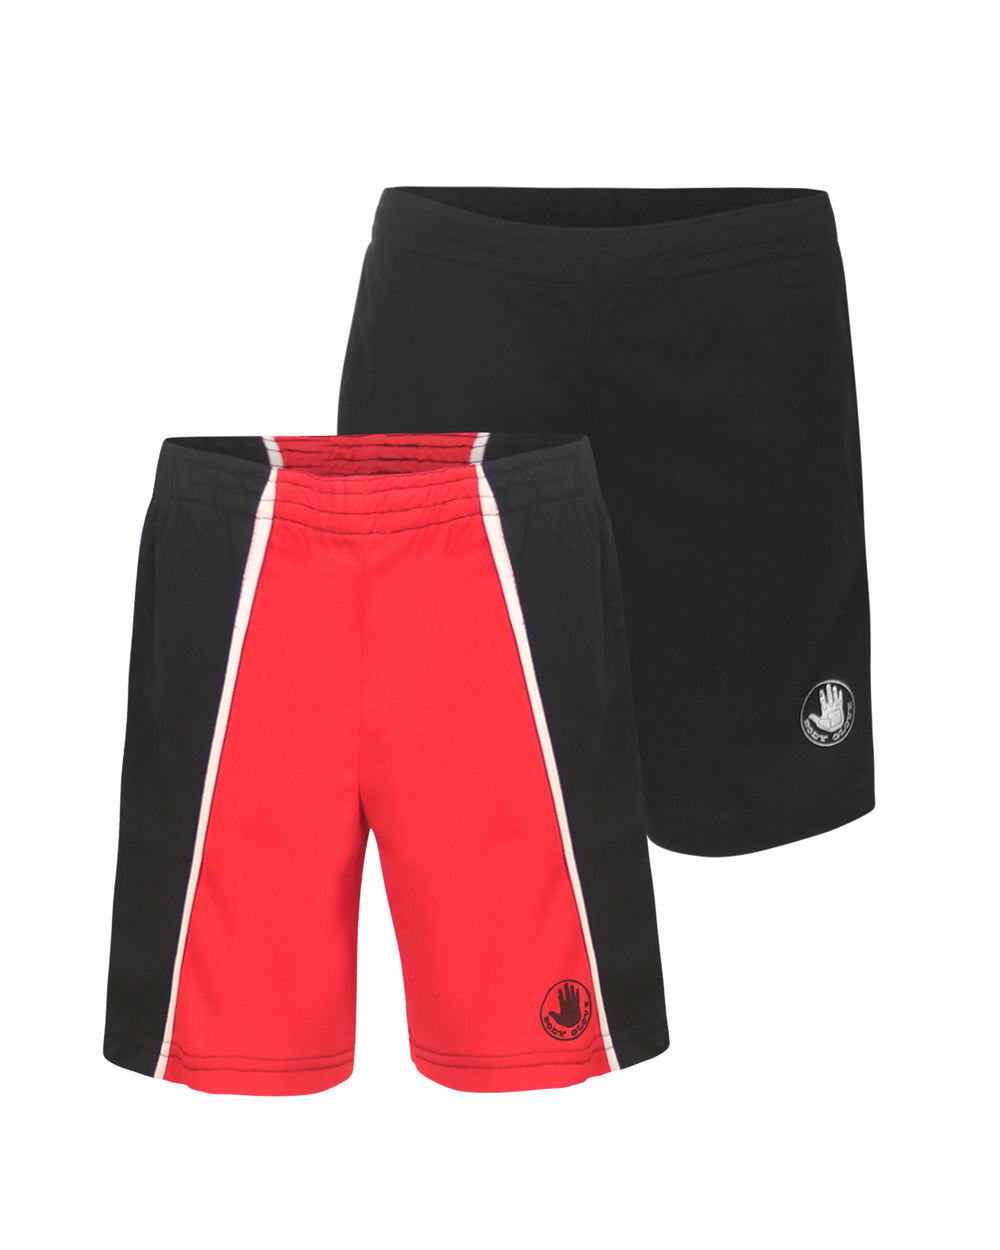 Boys' Solid and Two-Tone Shorts Set (8-18) - Black & Red/Black